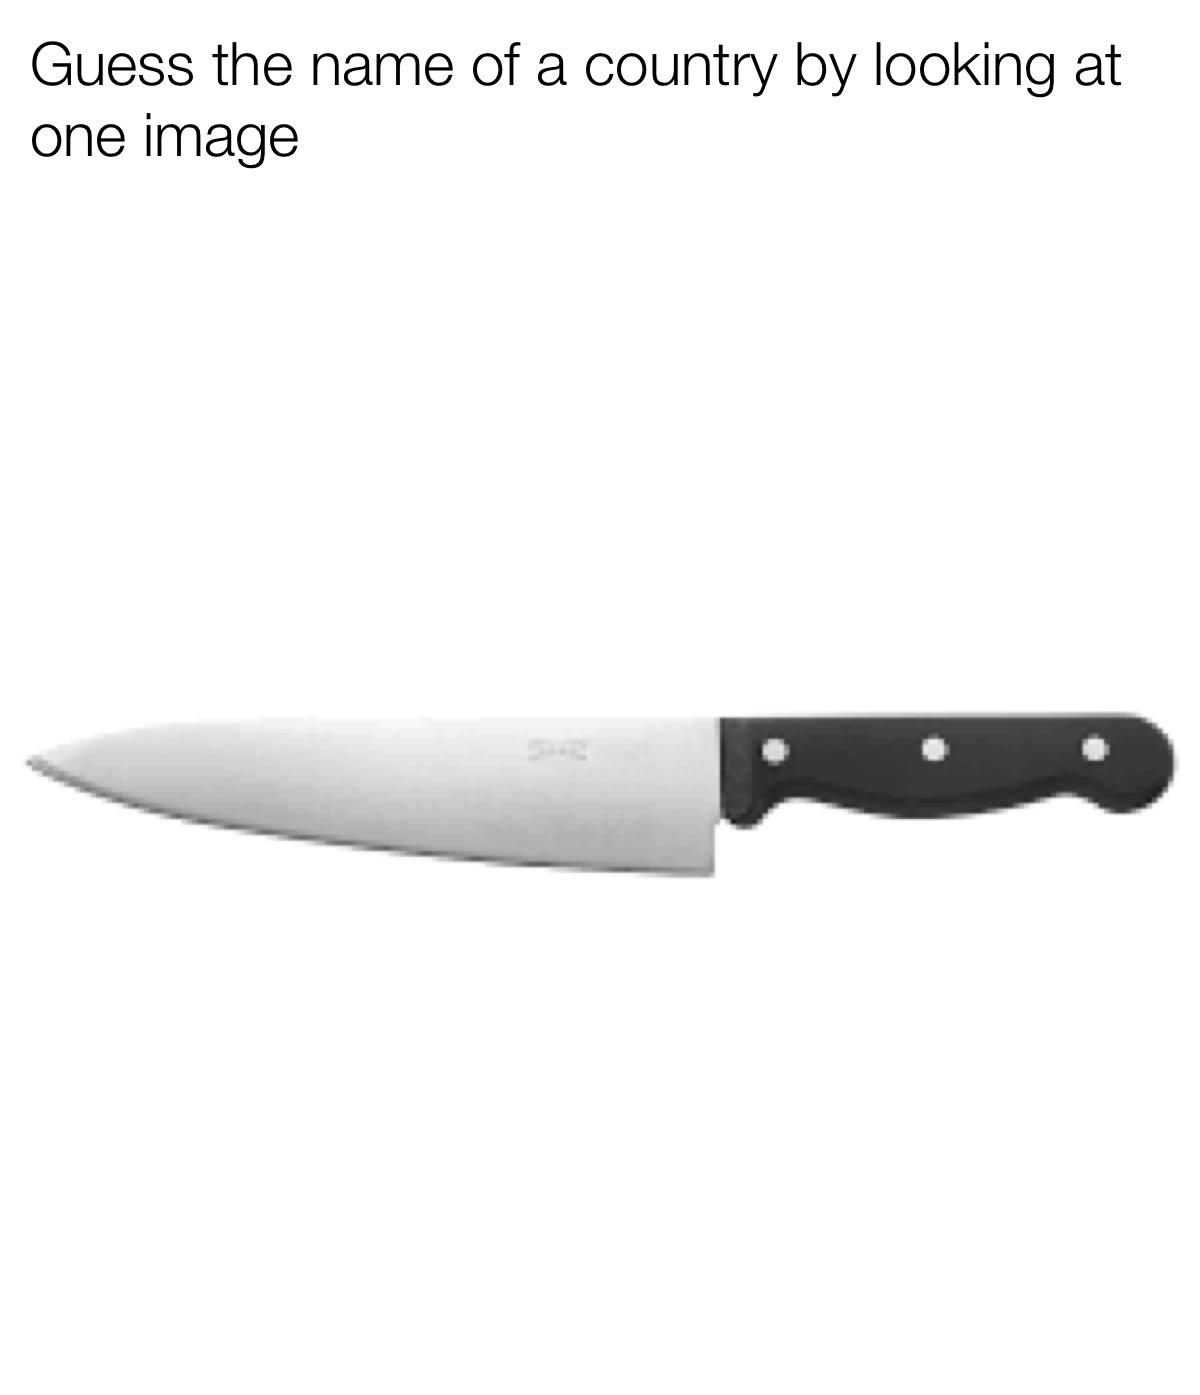 ikea chef knife - Guess the name of a country by looking at one image